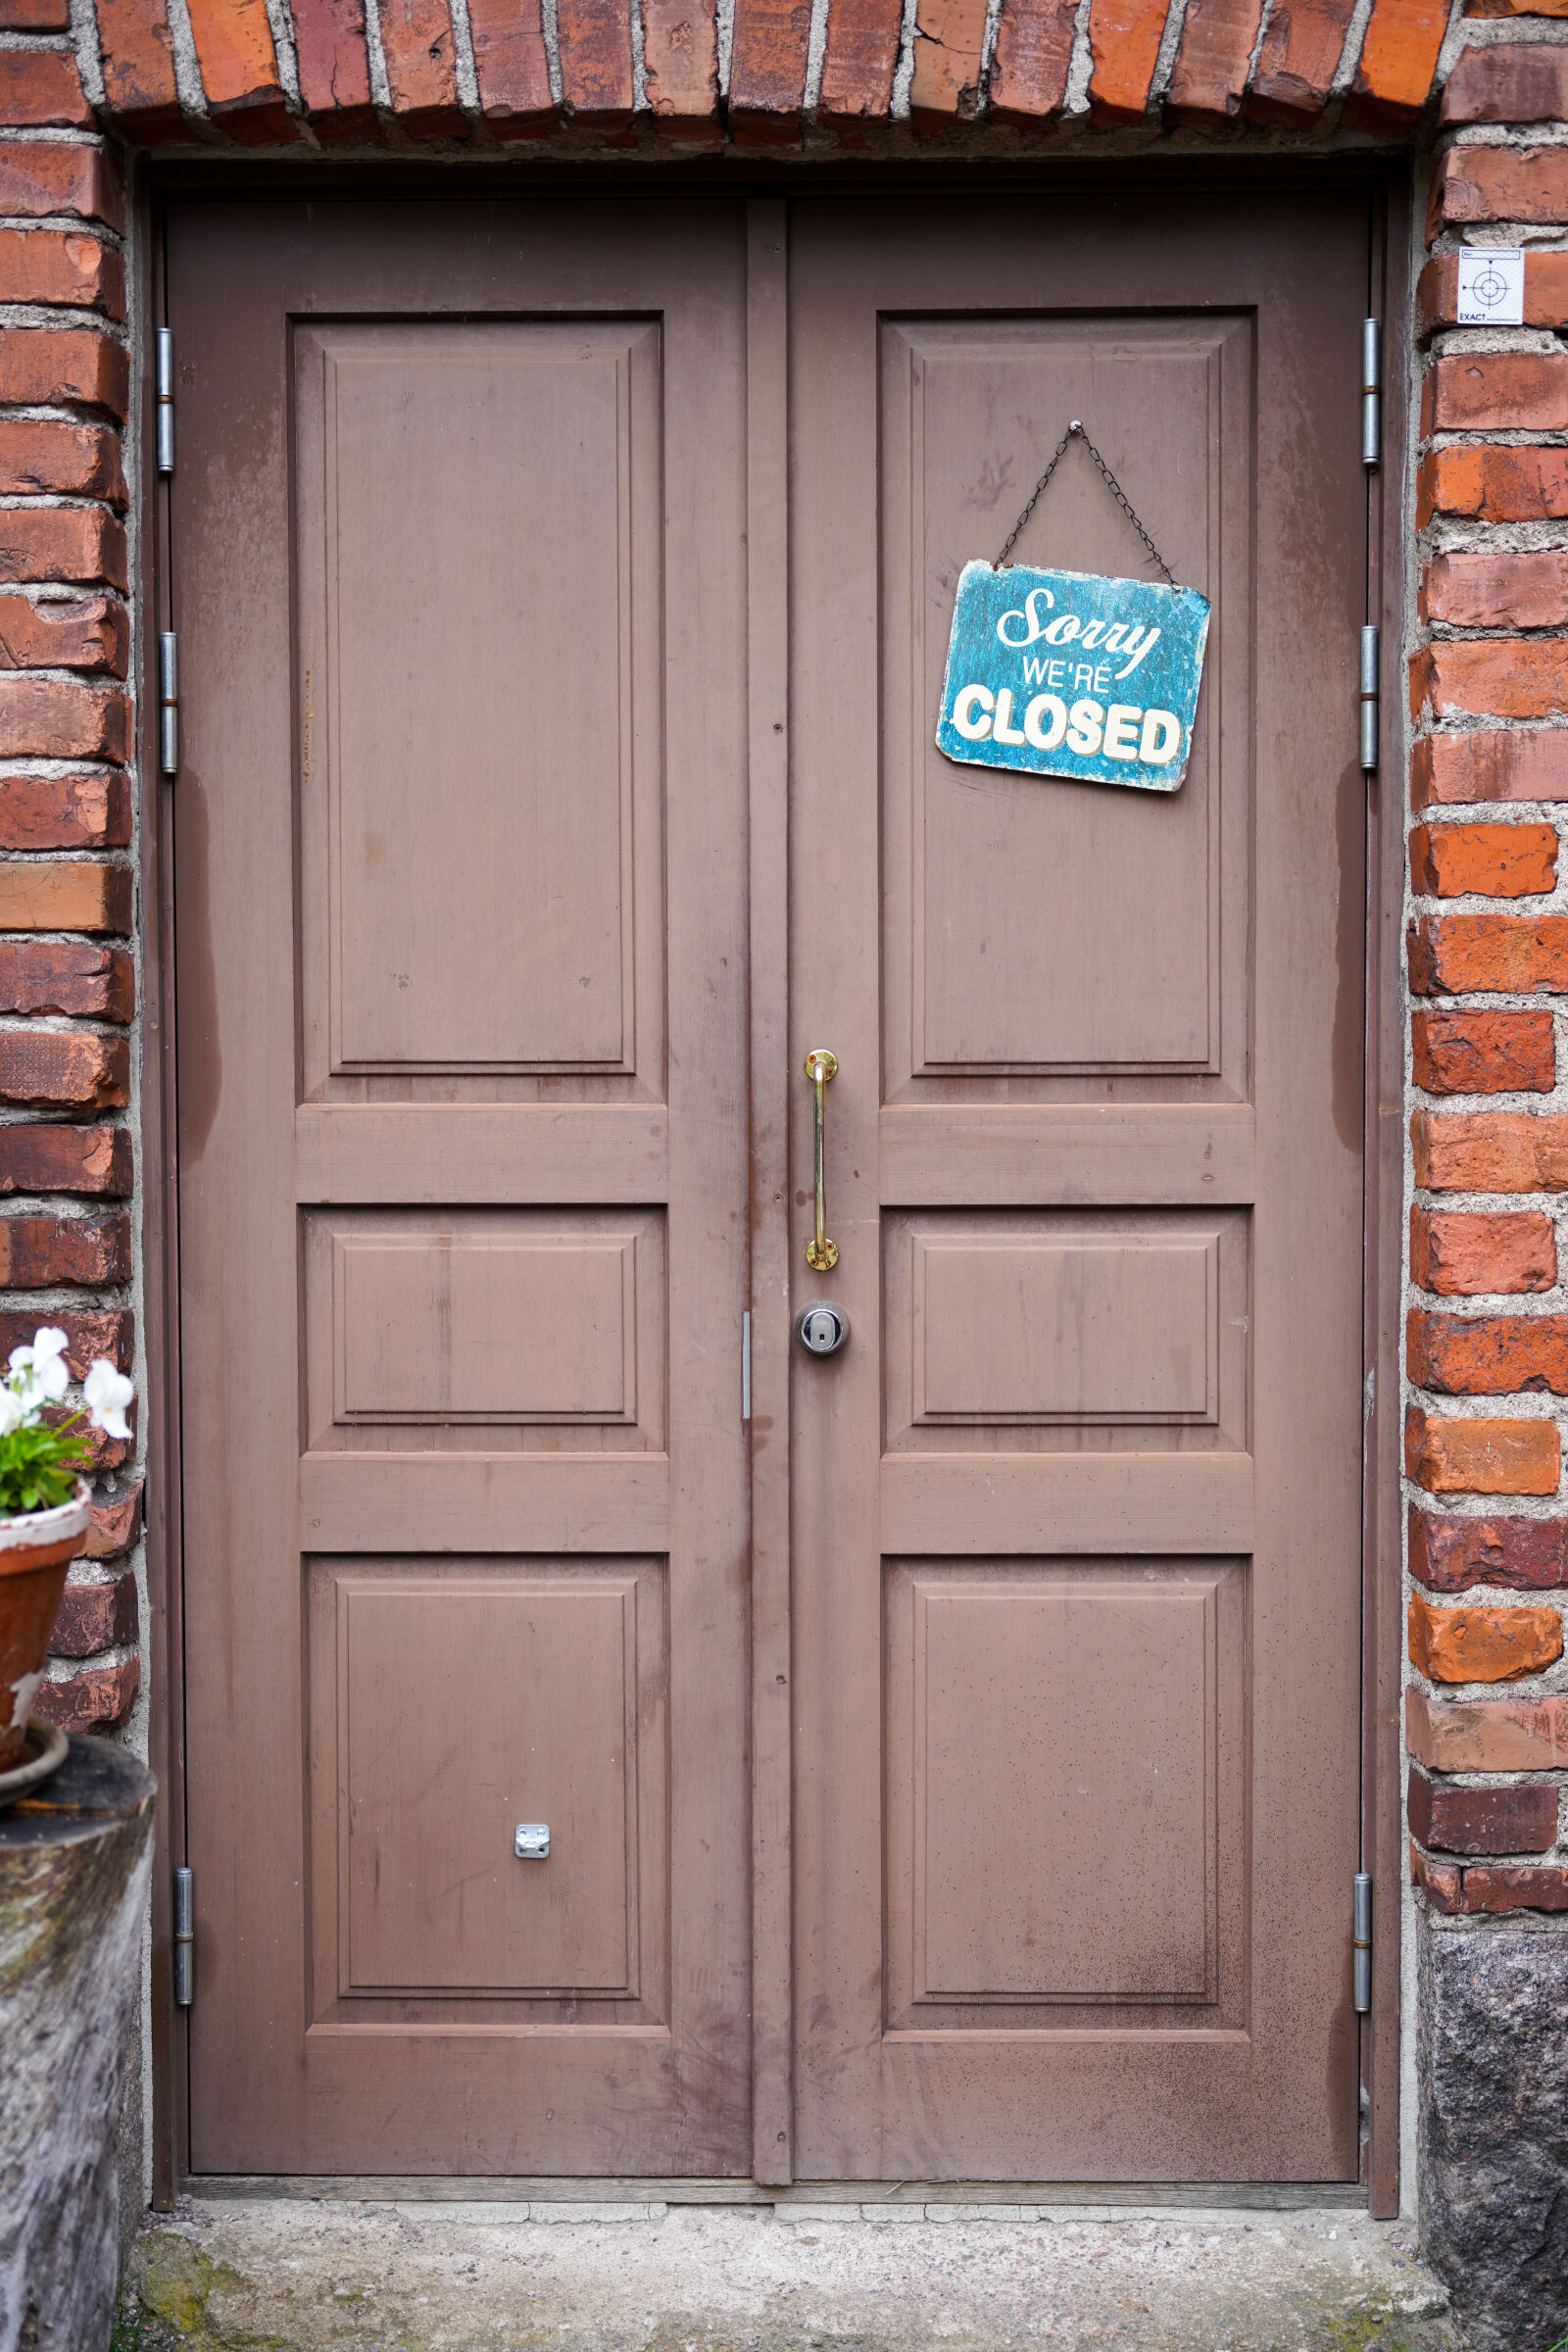 Sony a7R IV sample photo. Closed sign doorway photography